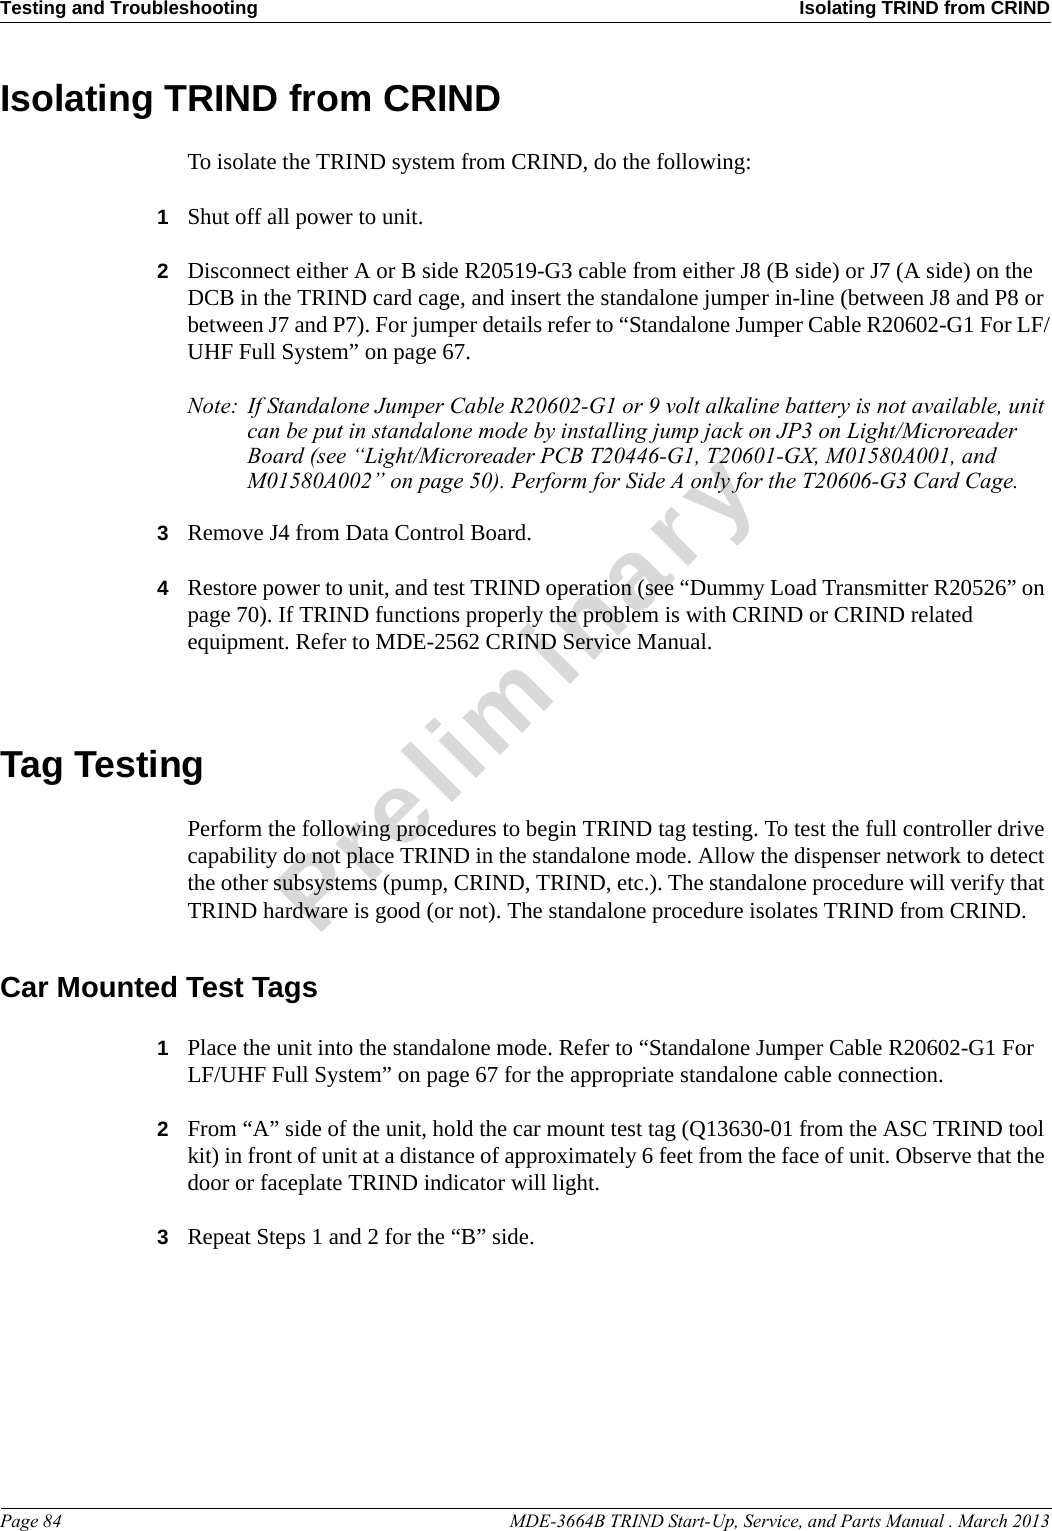 Testing and Troubleshooting Isolating TRIND from CRINDPage 84                                                                                                  MDE-3664B TRIND Start-Up, Service, and Parts Manual . March 2013PreliminaryIsolating TRIND from CRINDTo isolate the TRIND system from CRIND, do the following:1Shut off all power to unit.2Disconnect either A or B side R20519-G3 cable from either J8 (B side) or J7 (A side) on the DCB in the TRIND card cage, and insert the standalone jumper in-line (between J8 and P8 or between J7 and P7). For jumper details refer to “Standalone Jumper Cable R20602-G1 For LF/UHF Full System” on page 67.Note: If Standalone Jumper Cable R20602-G1 or 9 volt alkaline battery is not available, unit can be put in standalone mode by installing jump jack on JP3 on Light/Microreader Board (see “Light/Microreader PCB T20446-G1, T20601-GX, M01580A001, and M01580A002” on page 50). Perform for Side A only for the T20606-G3 Card Cage.3Remove J4 from Data Control Board.4Restore power to unit, and test TRIND operation (see “Dummy Load Transmitter R20526” on page 70). If TRIND functions properly the problem is with CRIND or CRIND related equipment. Refer to MDE-2562 CRIND Service Manual.Tag TestingPerform the following procedures to begin TRIND tag testing. To test the full controller drive capability do not place TRIND in the standalone mode. Allow the dispenser network to detect the other subsystems (pump, CRIND, TRIND, etc.). The standalone procedure will verify that TRIND hardware is good (or not). The standalone procedure isolates TRIND from CRIND.Car Mounted Test Tags1Place the unit into the standalone mode. Refer to “Standalone Jumper Cable R20602-G1 For LF/UHF Full System” on page 67 for the appropriate standalone cable connection.2From “A” side of the unit, hold the car mount test tag (Q13630-01 from the ASC TRIND tool kit) in front of unit at a distance of approximately 6 feet from the face of unit. Observe that the door or faceplate TRIND indicator will light.3Repeat Steps 1 and 2 for the “B” side.